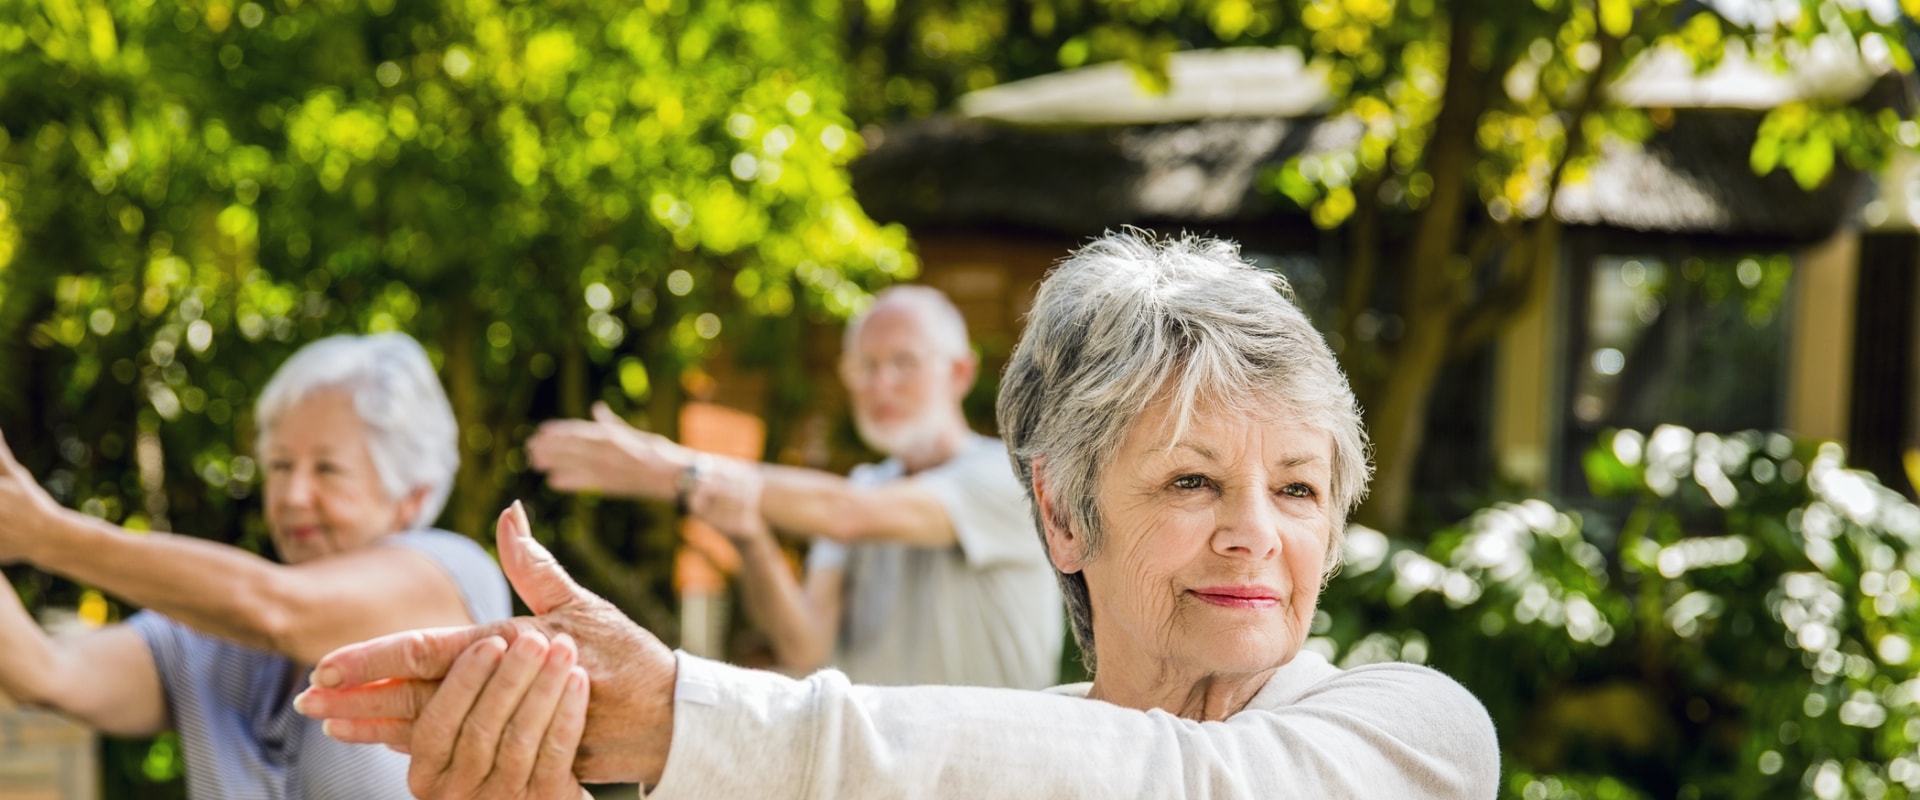 Exploring Recreation and Social Events in Retirement Communities